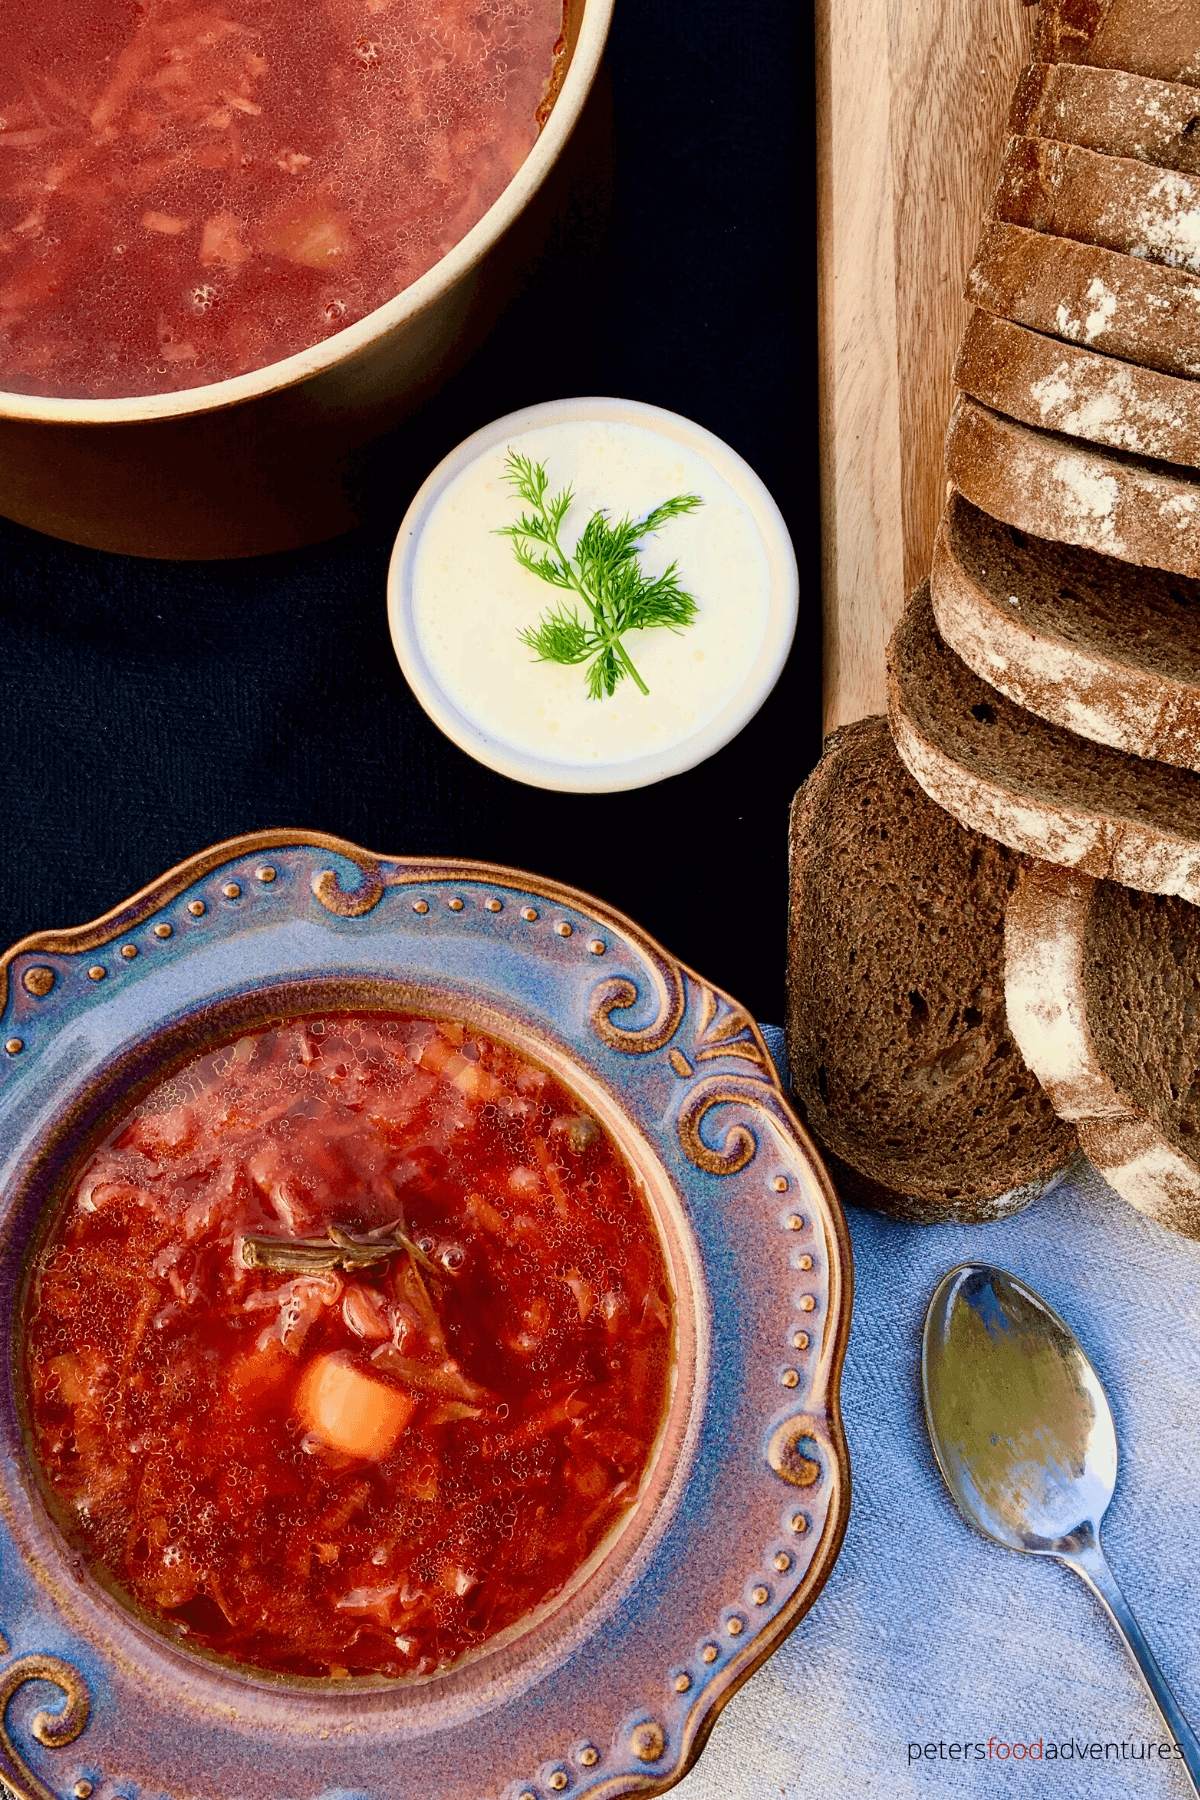 Authentic Beet Borscht with a meaty broth, cabbage, carrots, potatoes and beets. The tastiest beet soup that's easy, delicious and heartwarming. Borsch (Борщ) is so popular, that it was even eaten by Soviet cosmonauts in space.